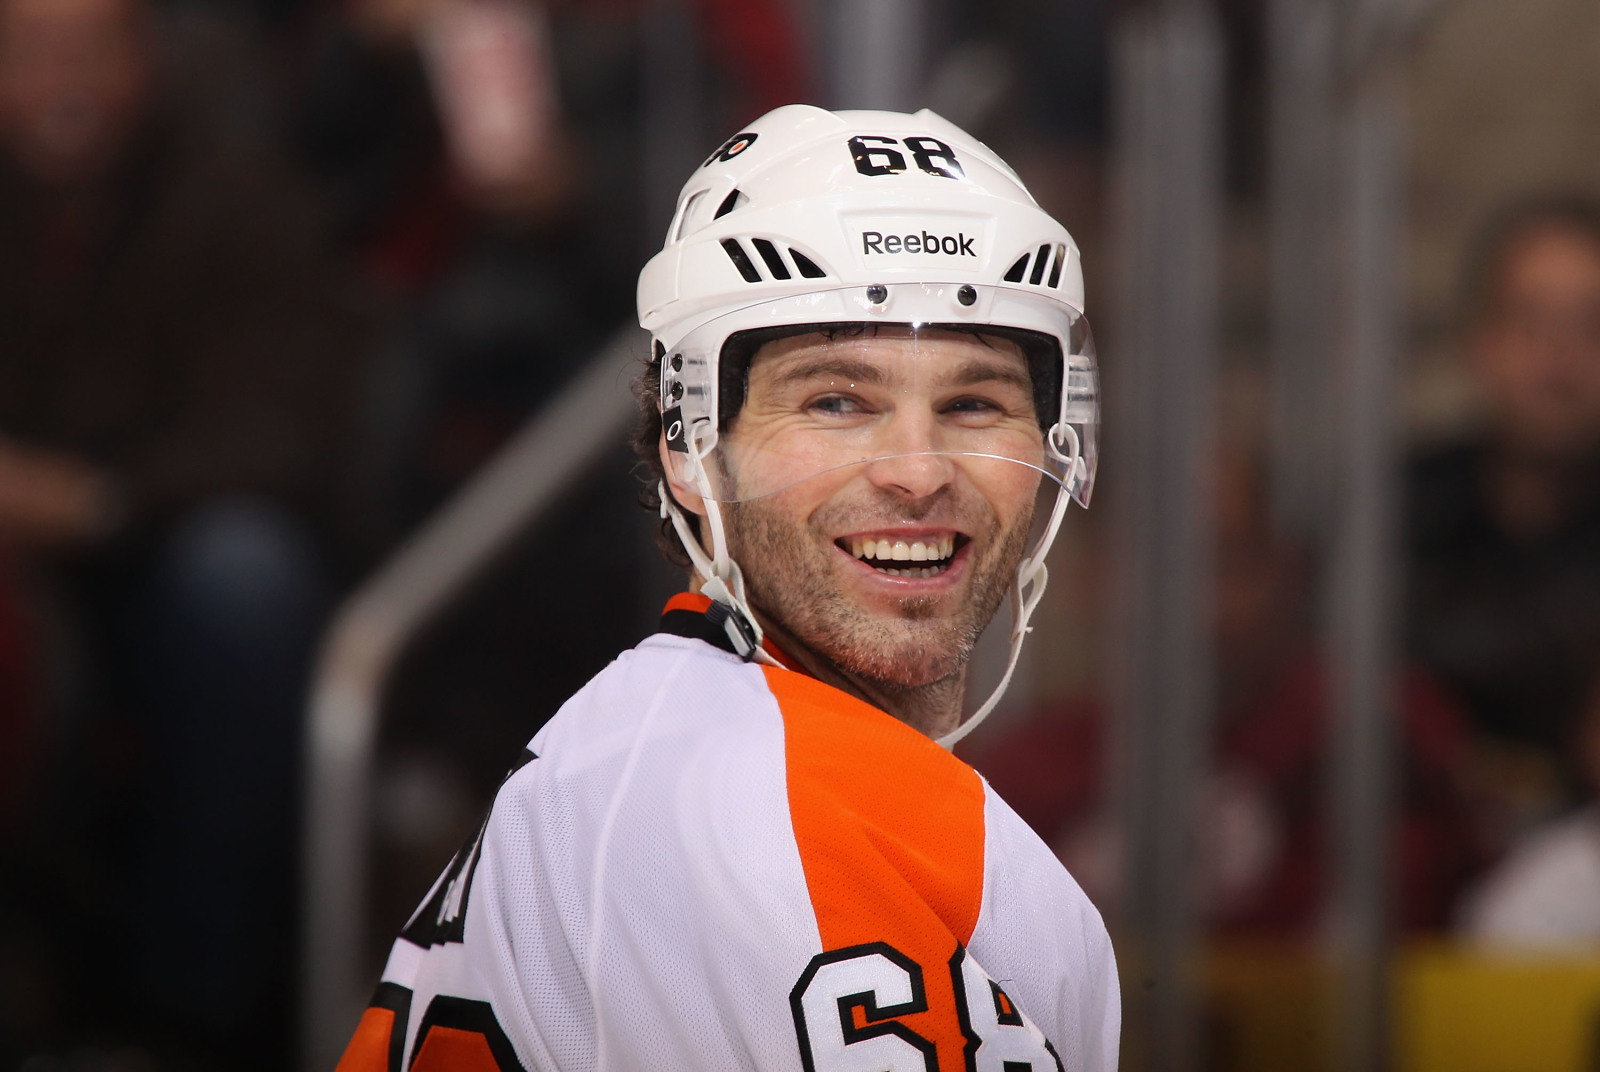 What if…the Flyers had drafted Jaromir Jagr?